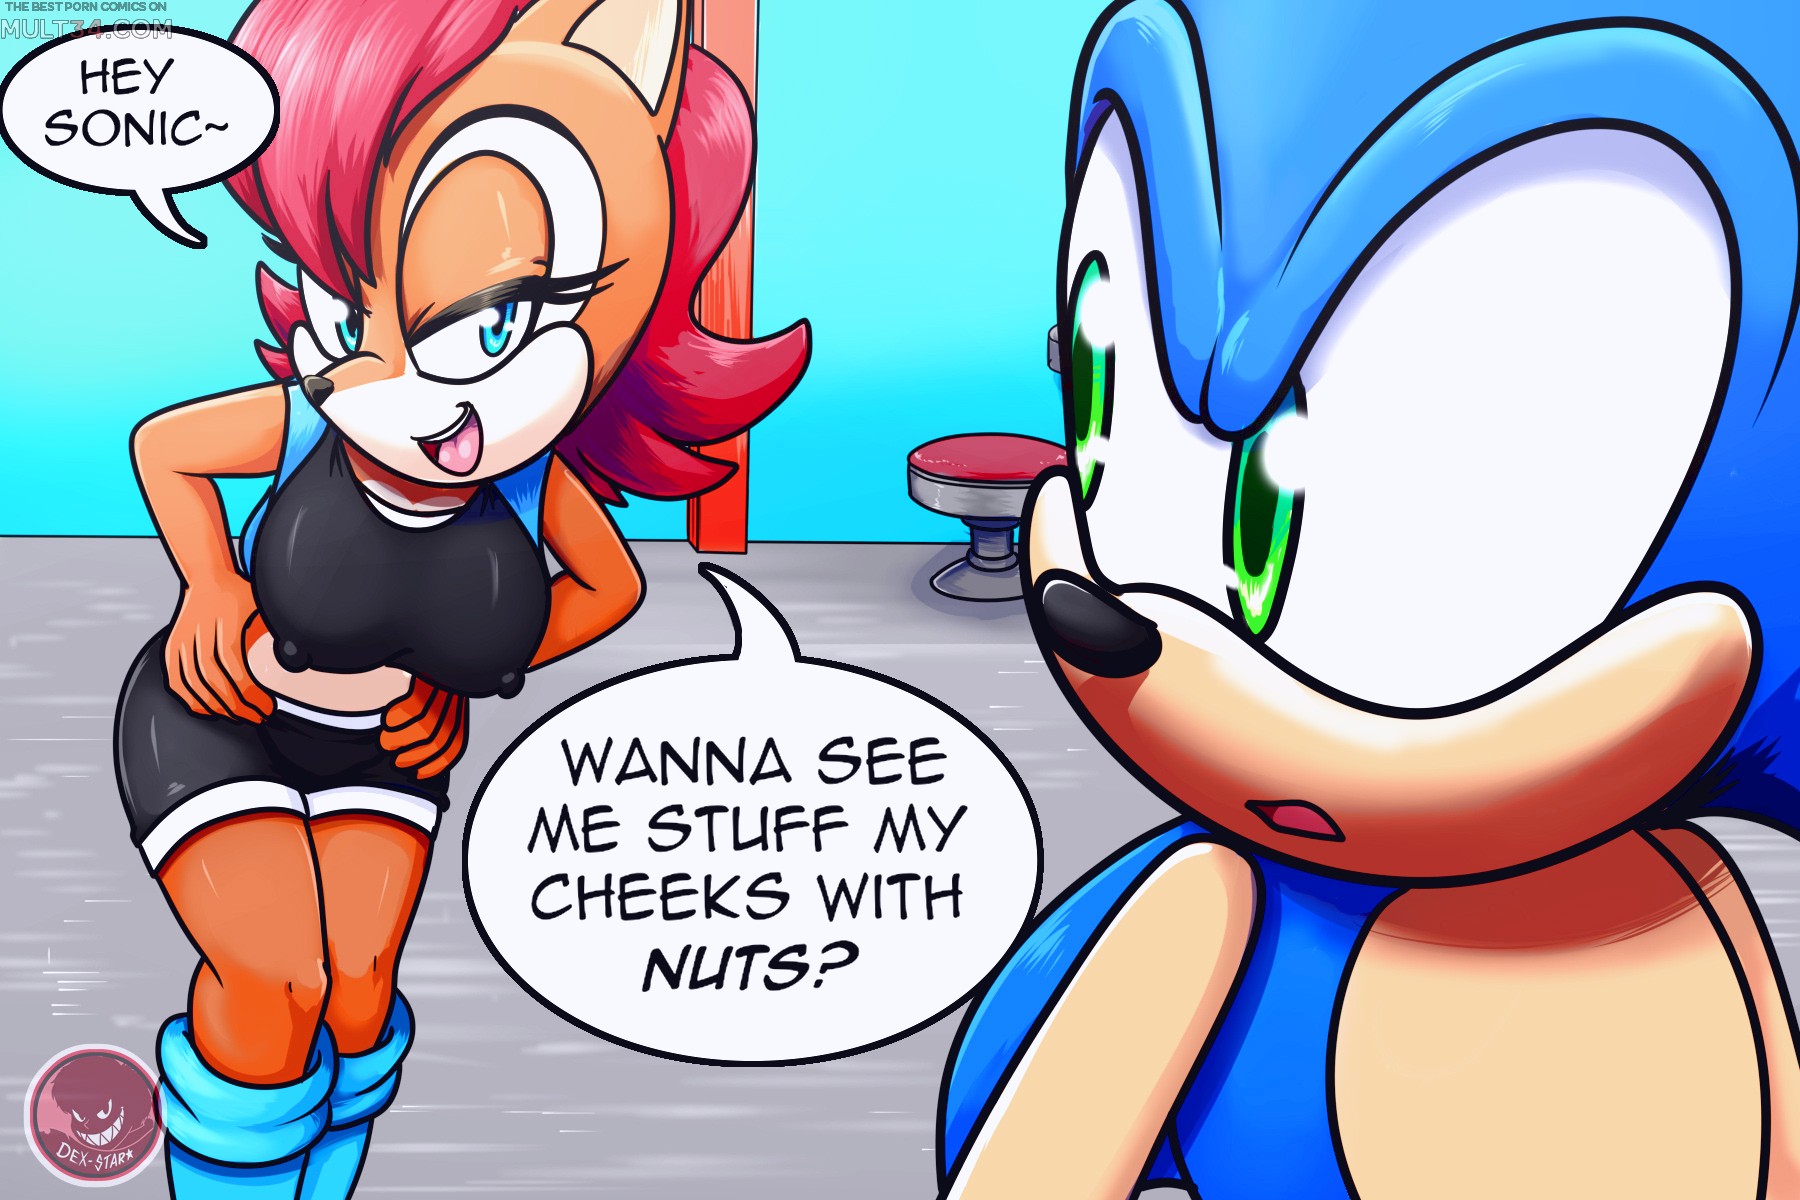 Did You Say Nuts porn comic page 1 on category Sonic The Hedgehog